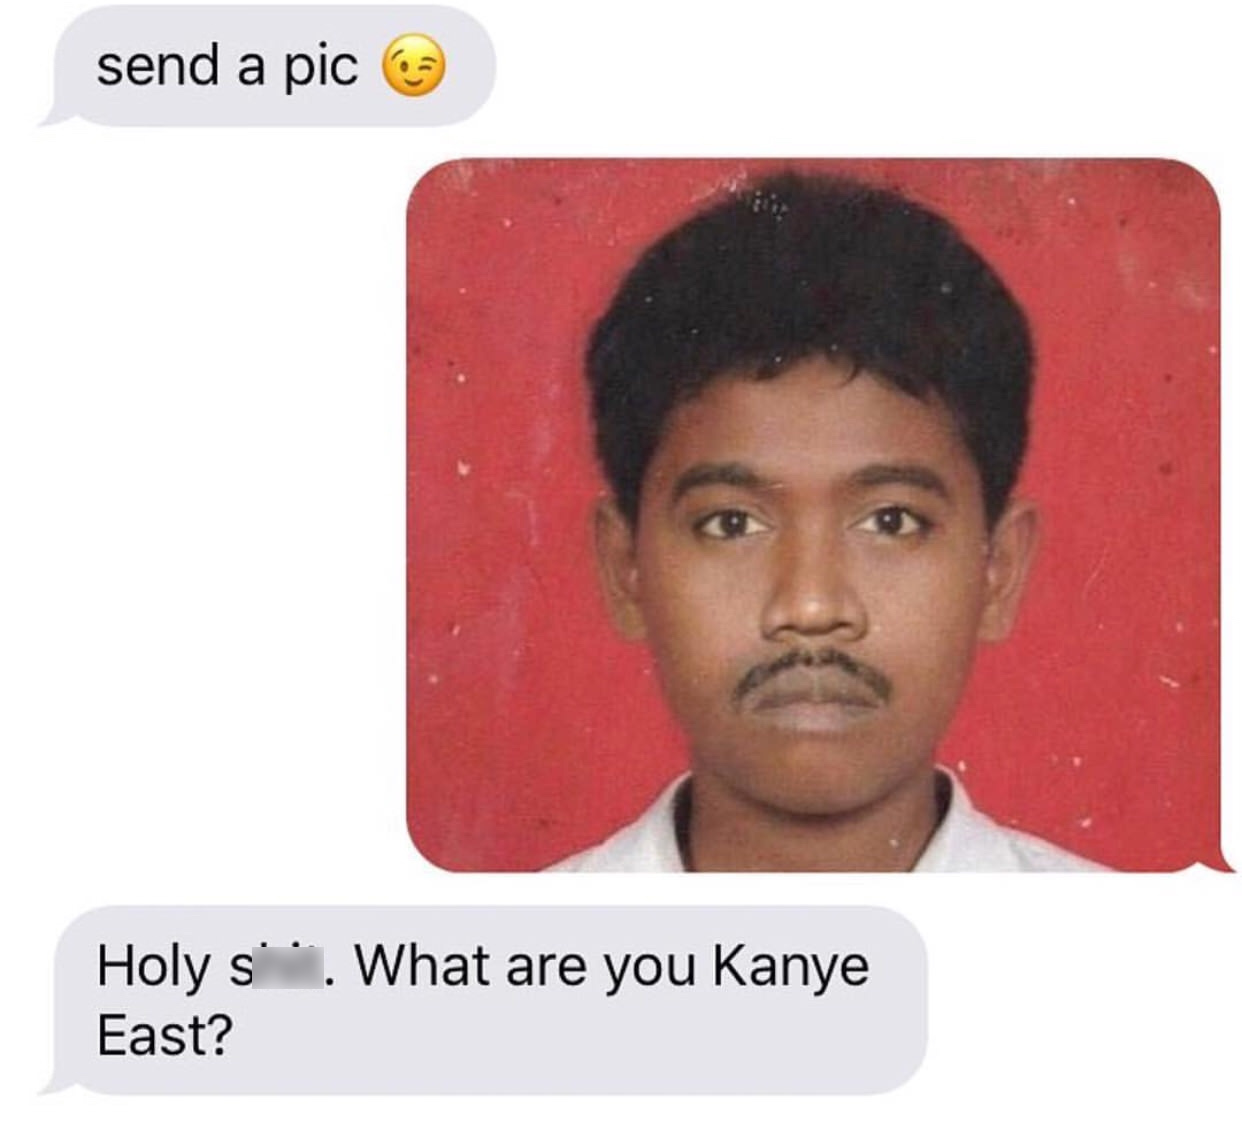 kanye east - send a pica Holy s . What are you Kanye East?